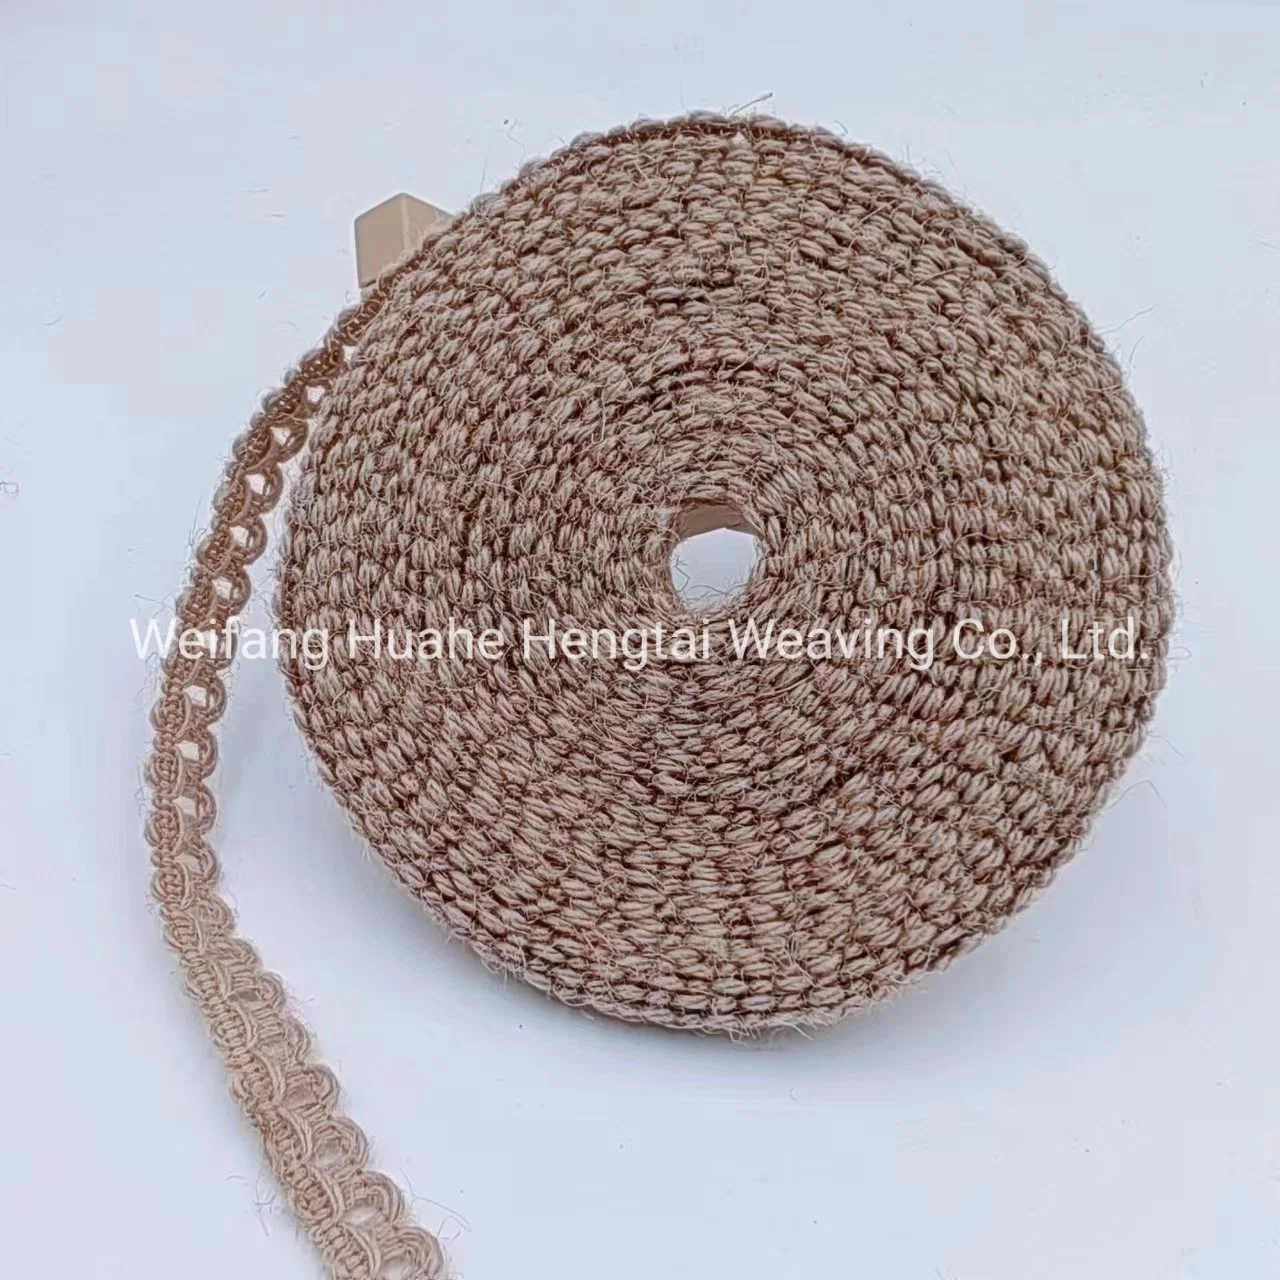 Exquisite Lace Twine Handicraft Clothing Accessories